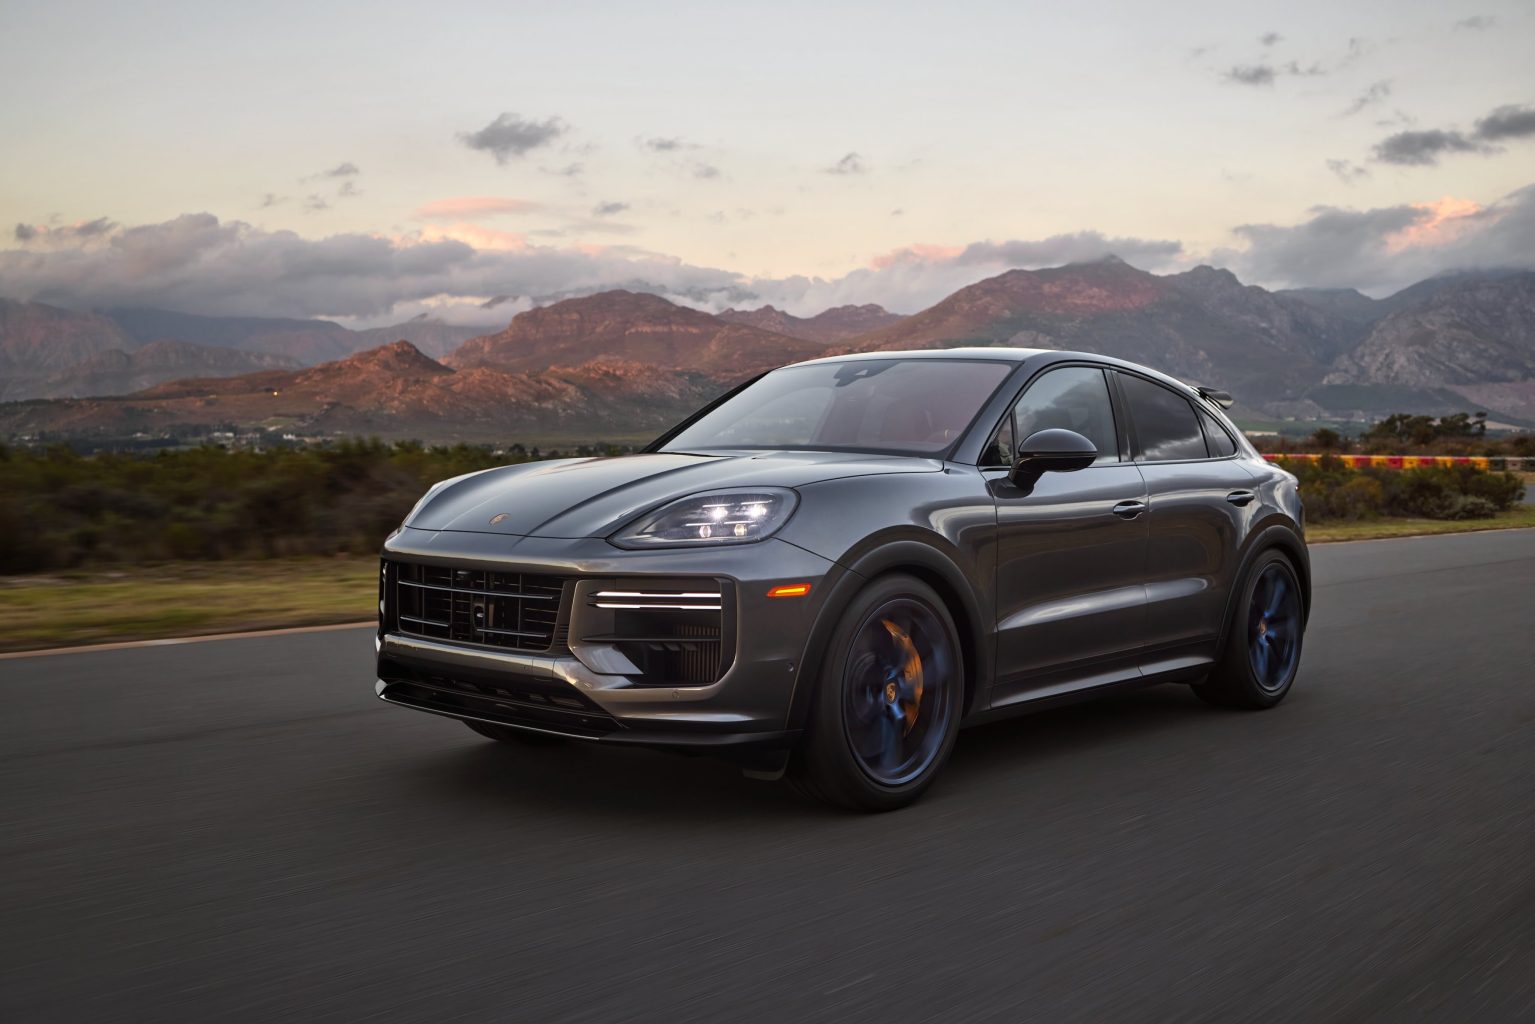 all the details on the new Porsche Cayenne